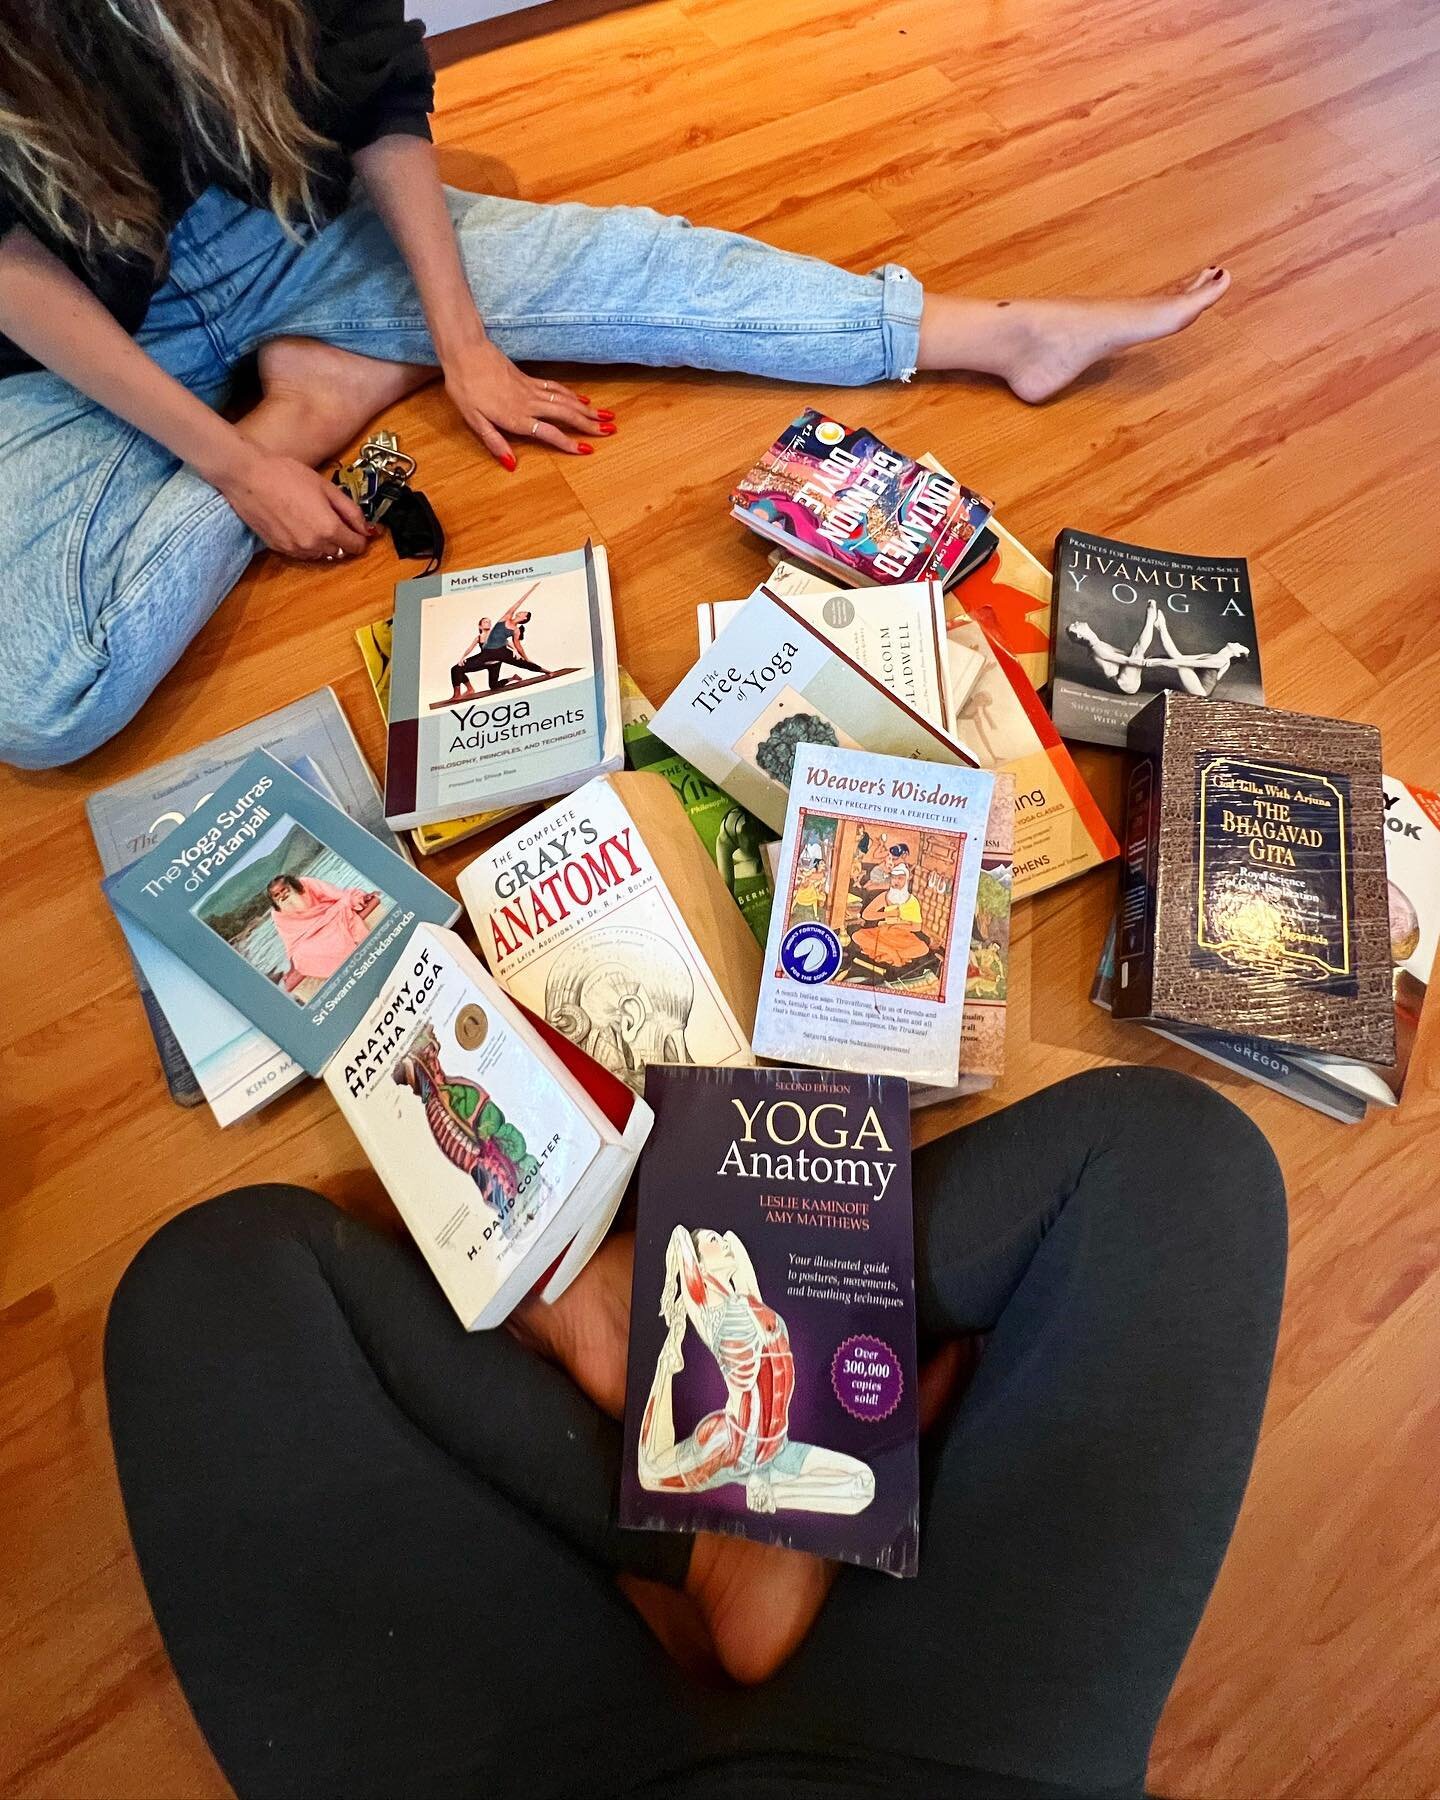 Thank you @longoria.art.kauai for inspiring our new lending library for teachers and students through your generous gifts! 📚✨If you are curious to explore the philosophical, psychological or physiological aspects of Yoga in tandem with a physical as